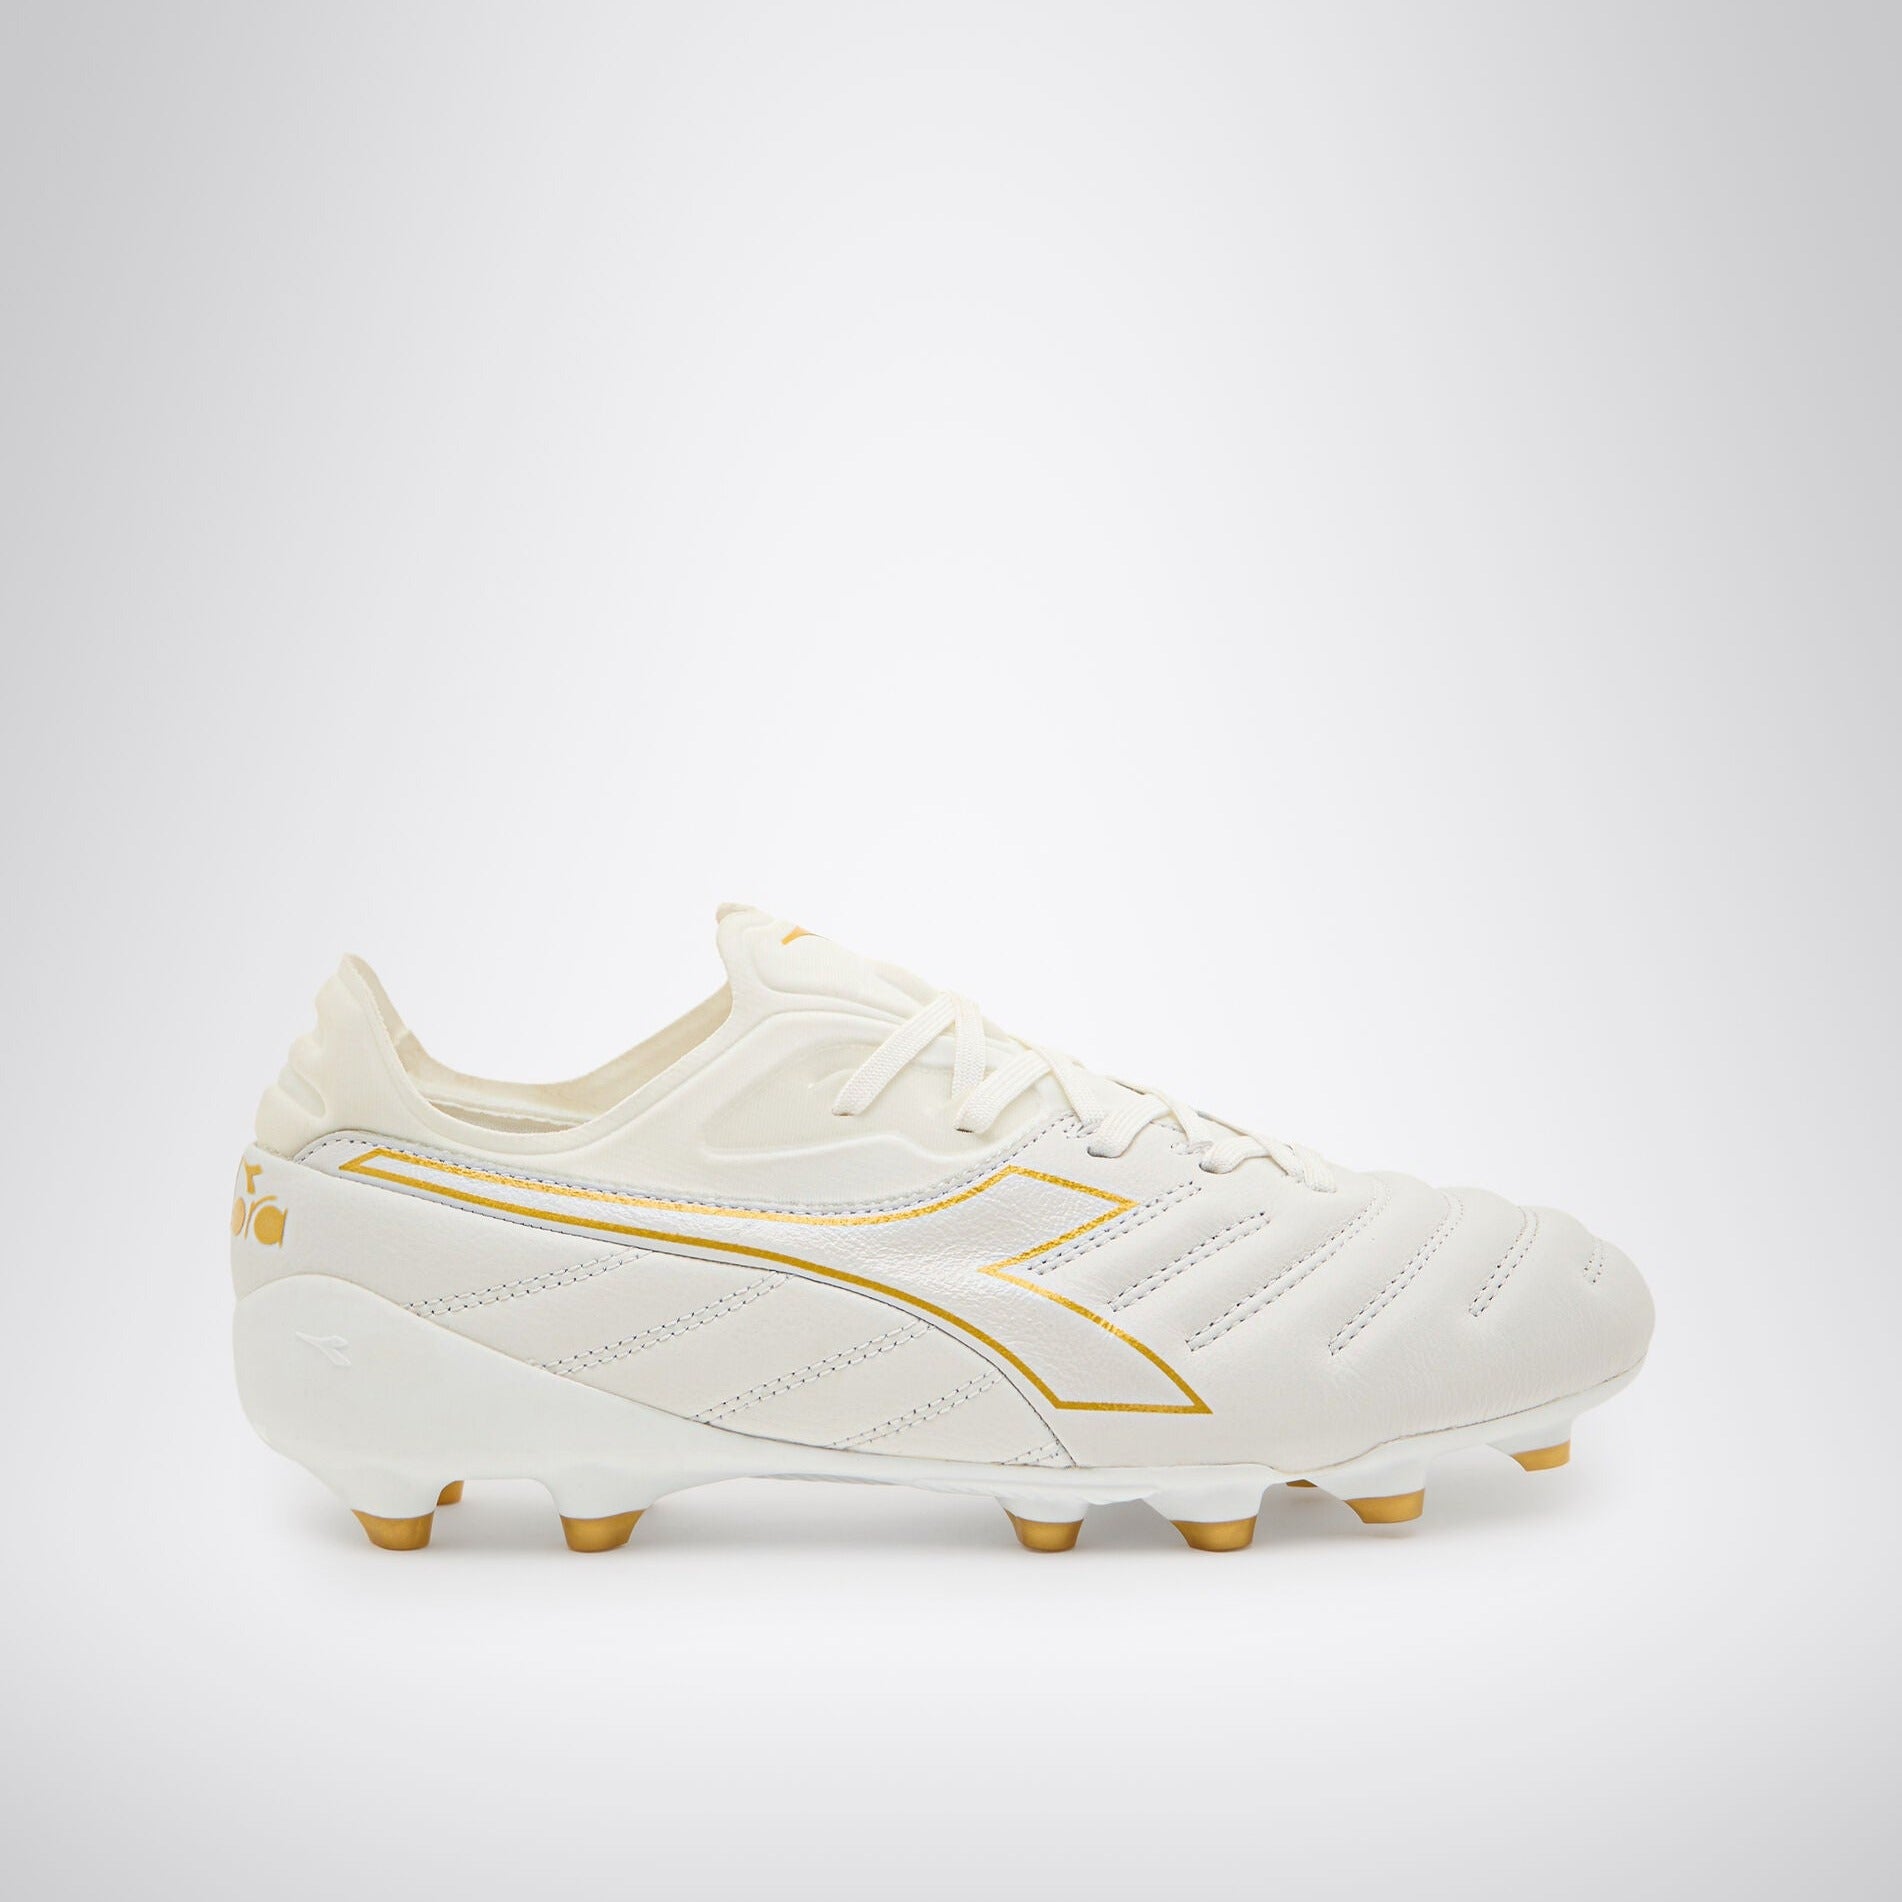 Brasil Elite Tech LPX Firmground Soccer Shoes